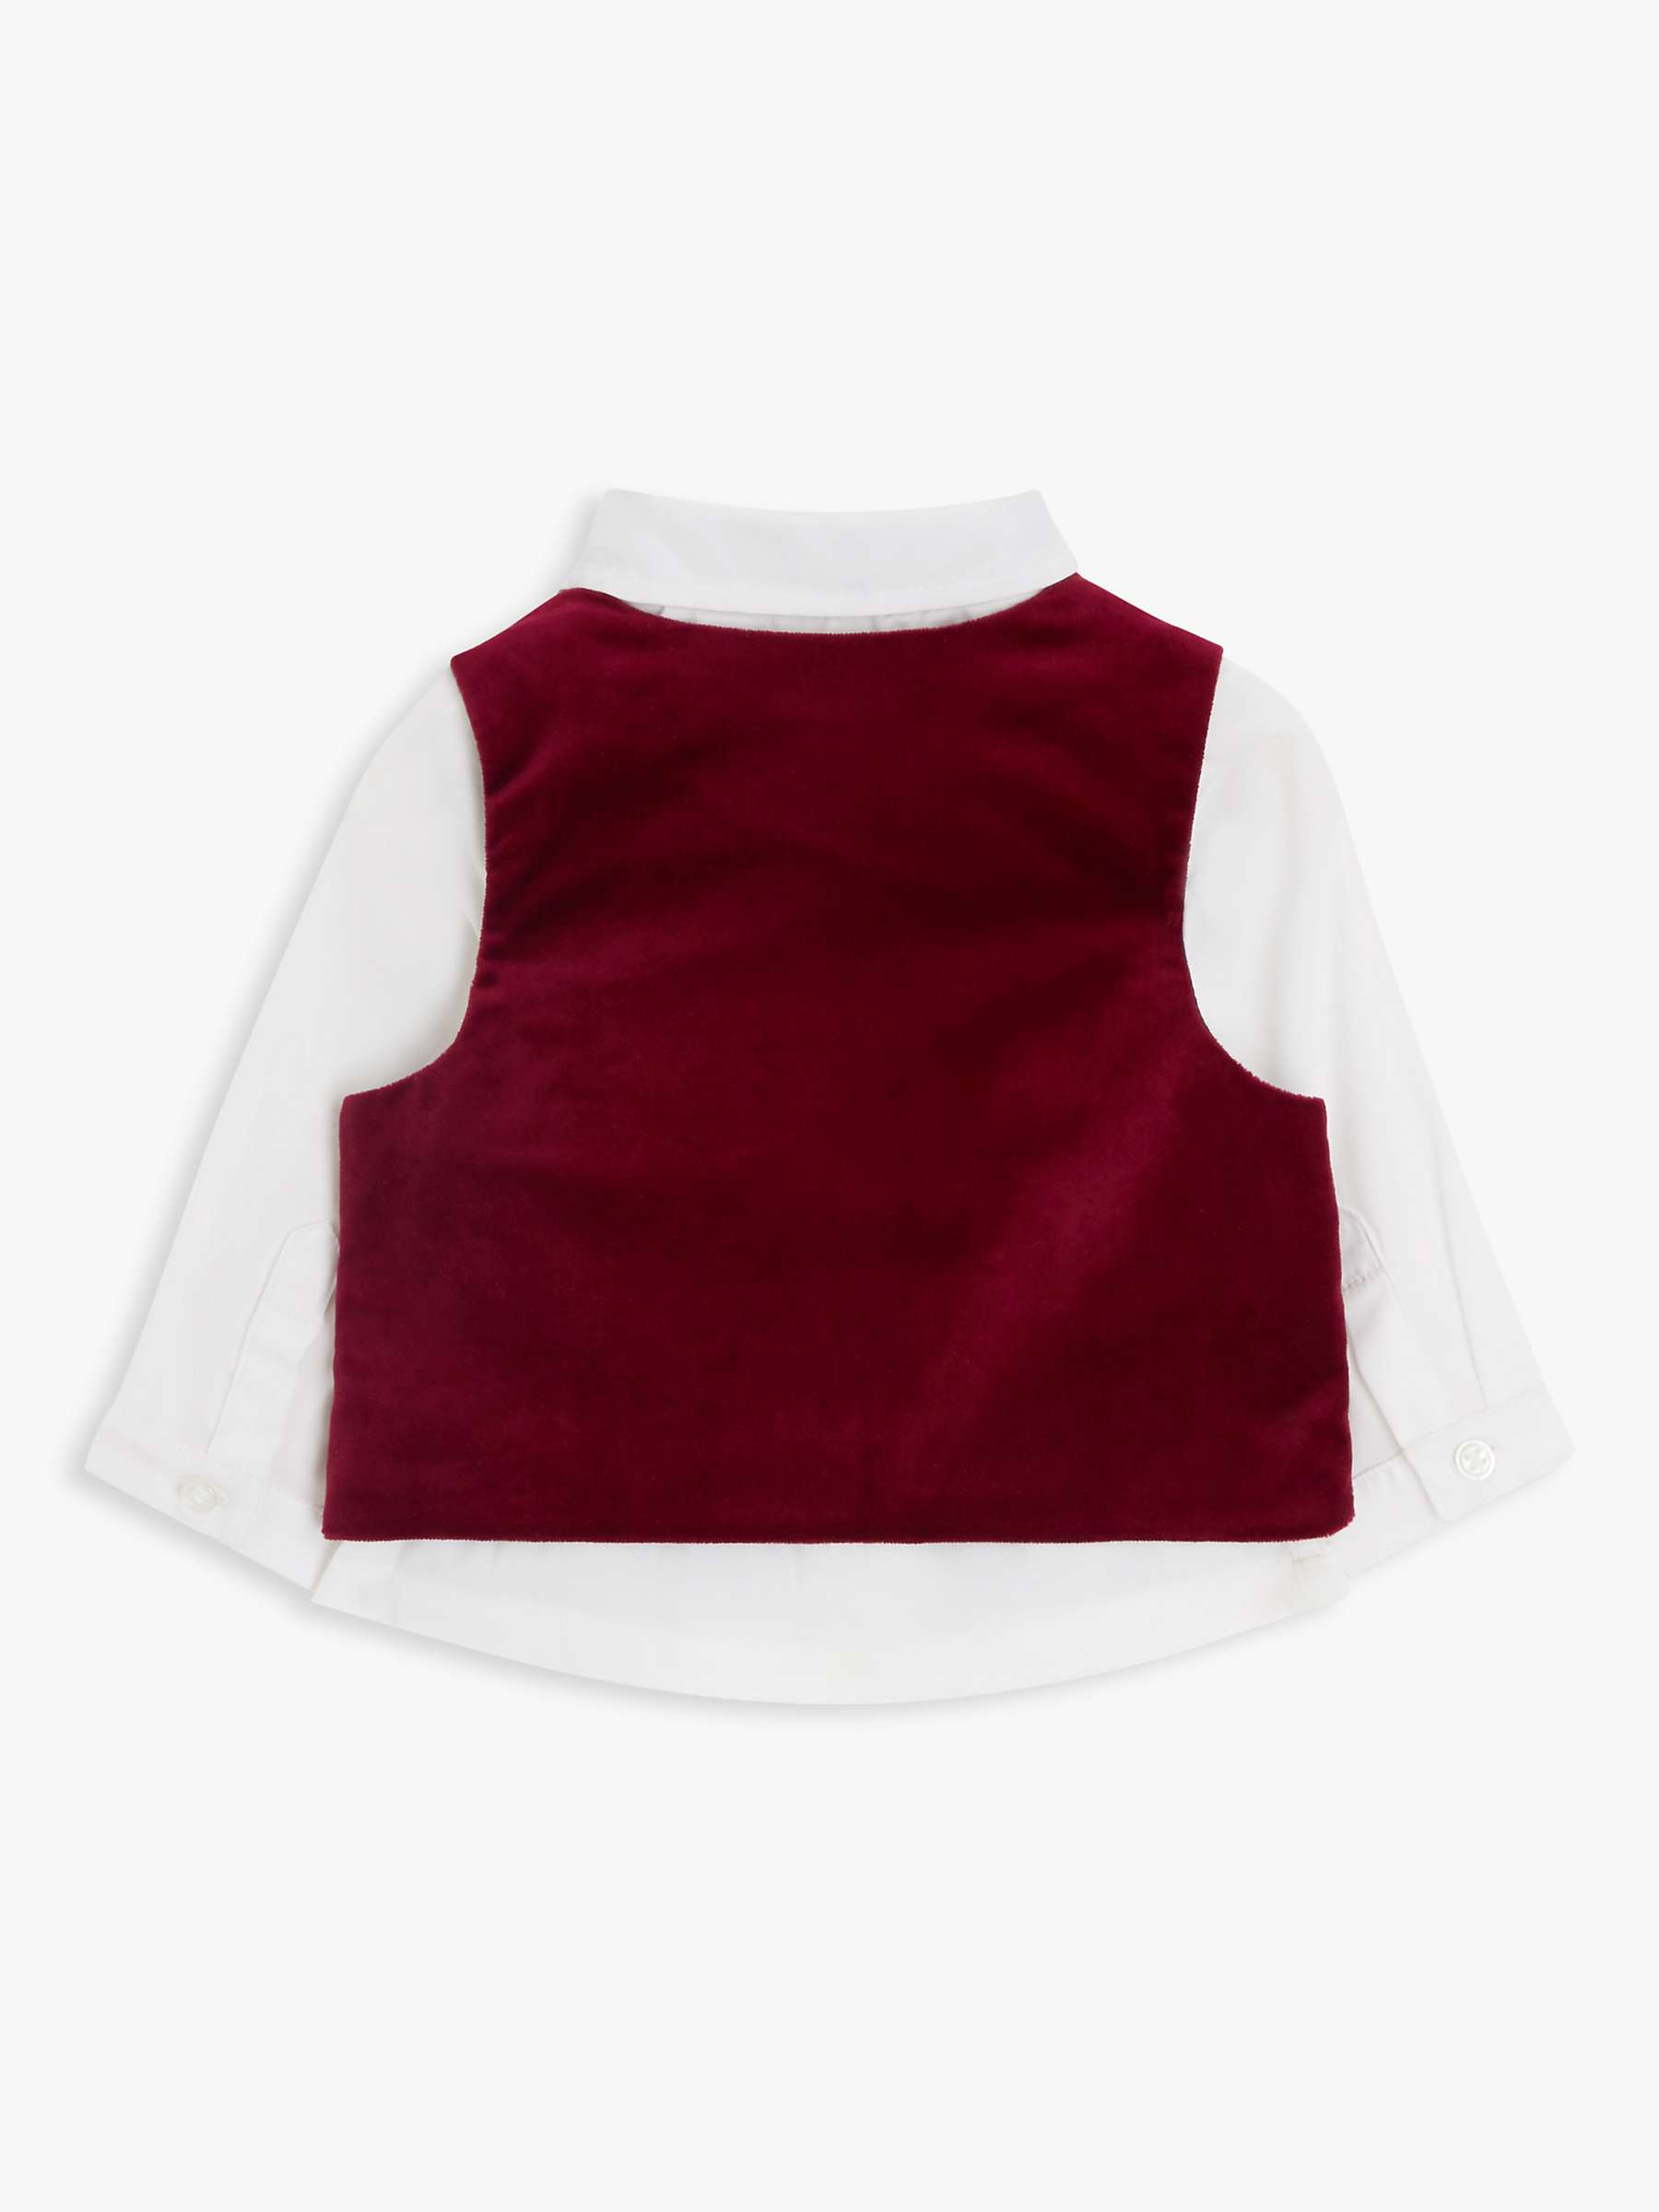 Buy John Lewis Heirloom Collection Baby Waistcoat, Shirt & Bow Set, Red Online at johnlewis.com